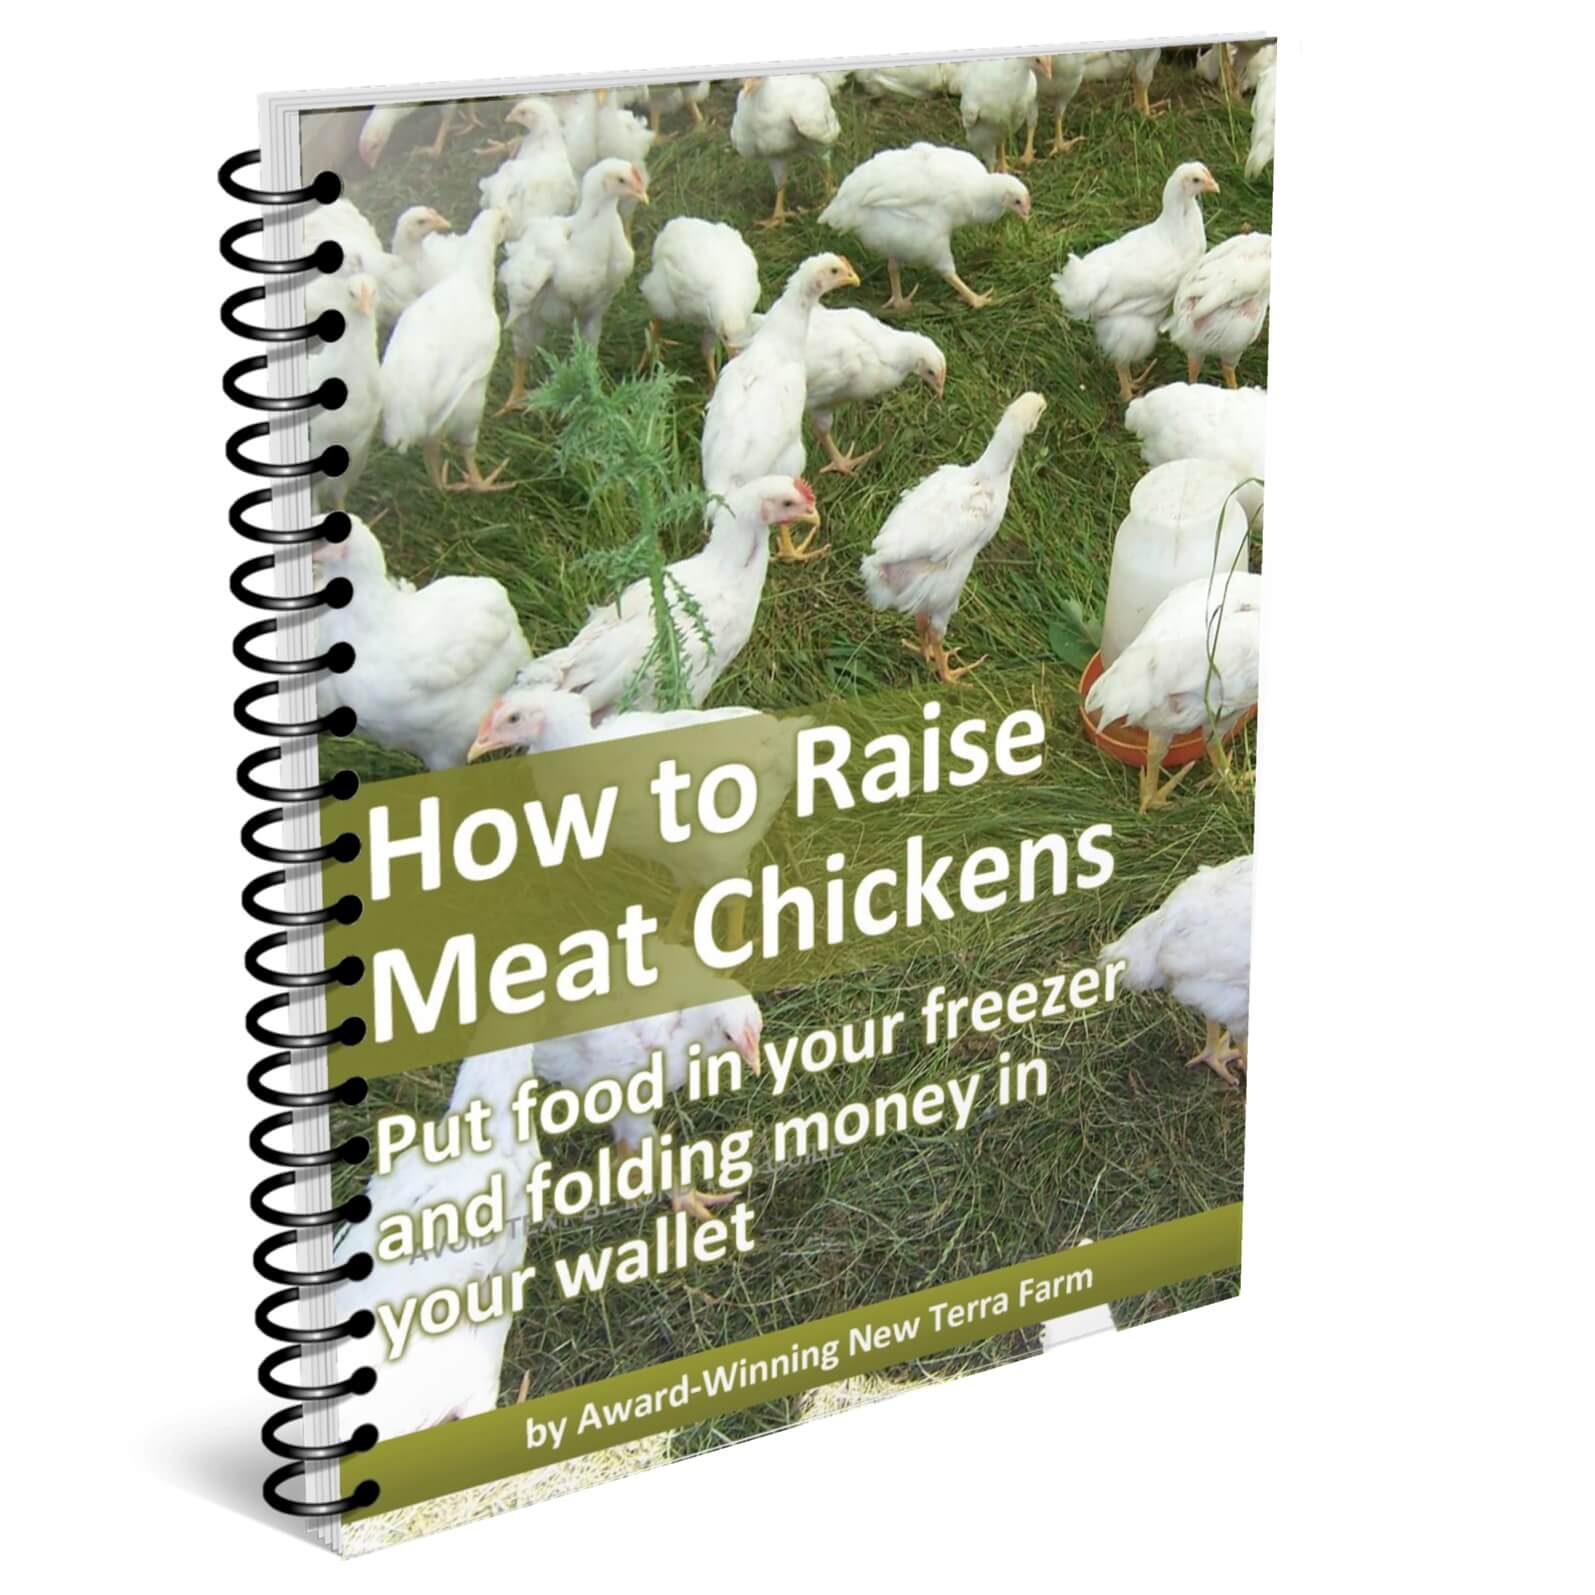 Raise Meat Chickens Cover compessed